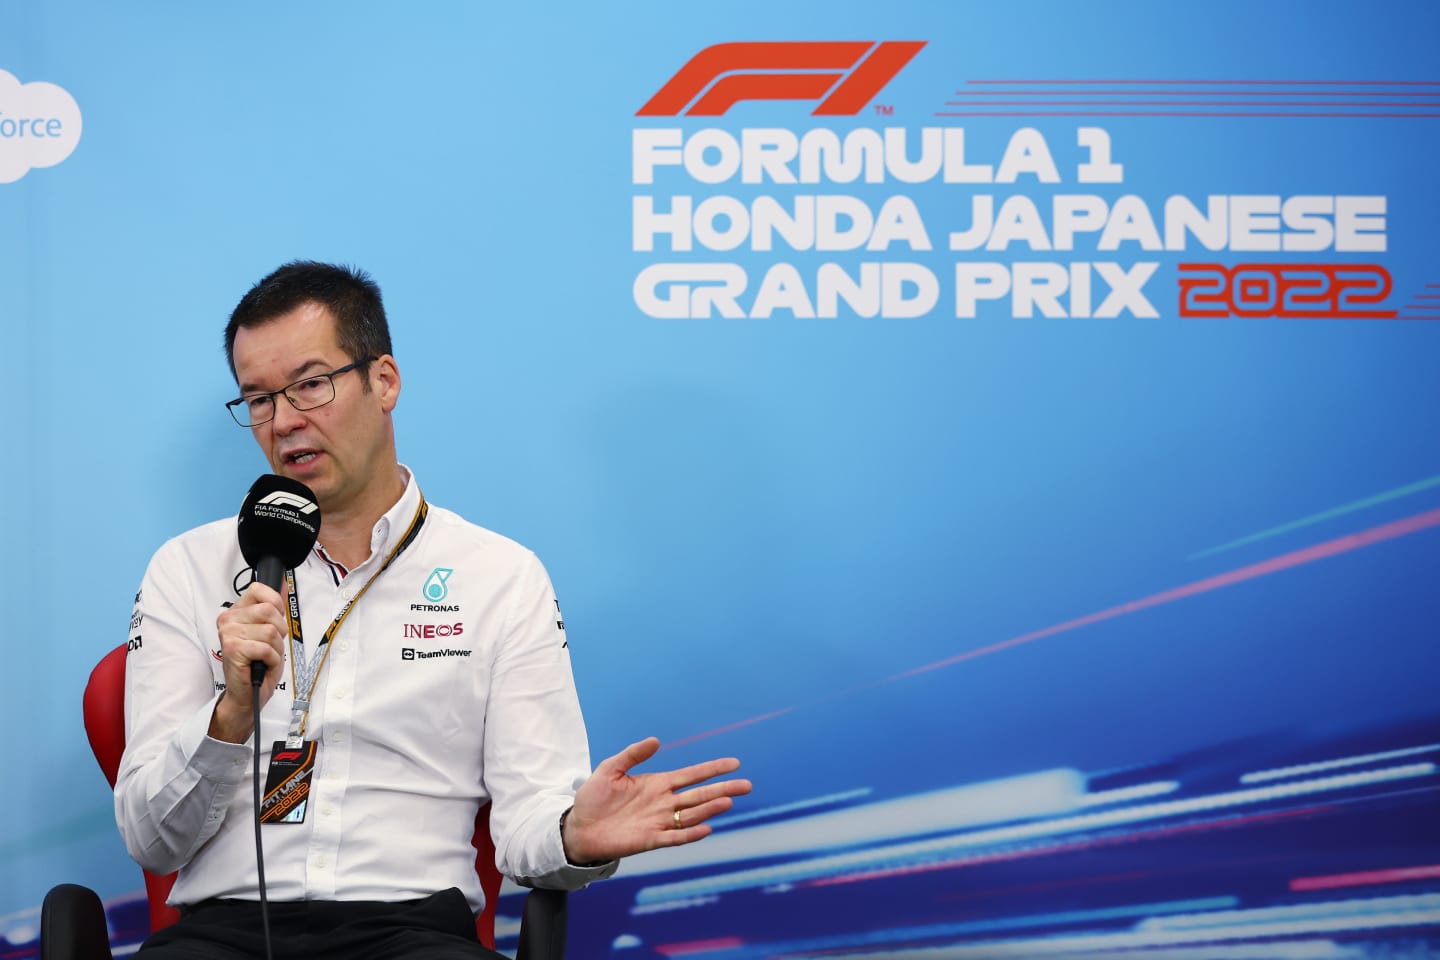 SUZUKA, JAPAN - OCTOBER 08: Mike Elliott, Technical Director at Mercedes GP attends the Teams Press Conference prior to final practice ahead of the F1 Grand Prix of Japan at Suzuka International Racing Course on October 08, 2022 in Suzuka, Japan. (Photo by Bryn Lennon/Getty Images)